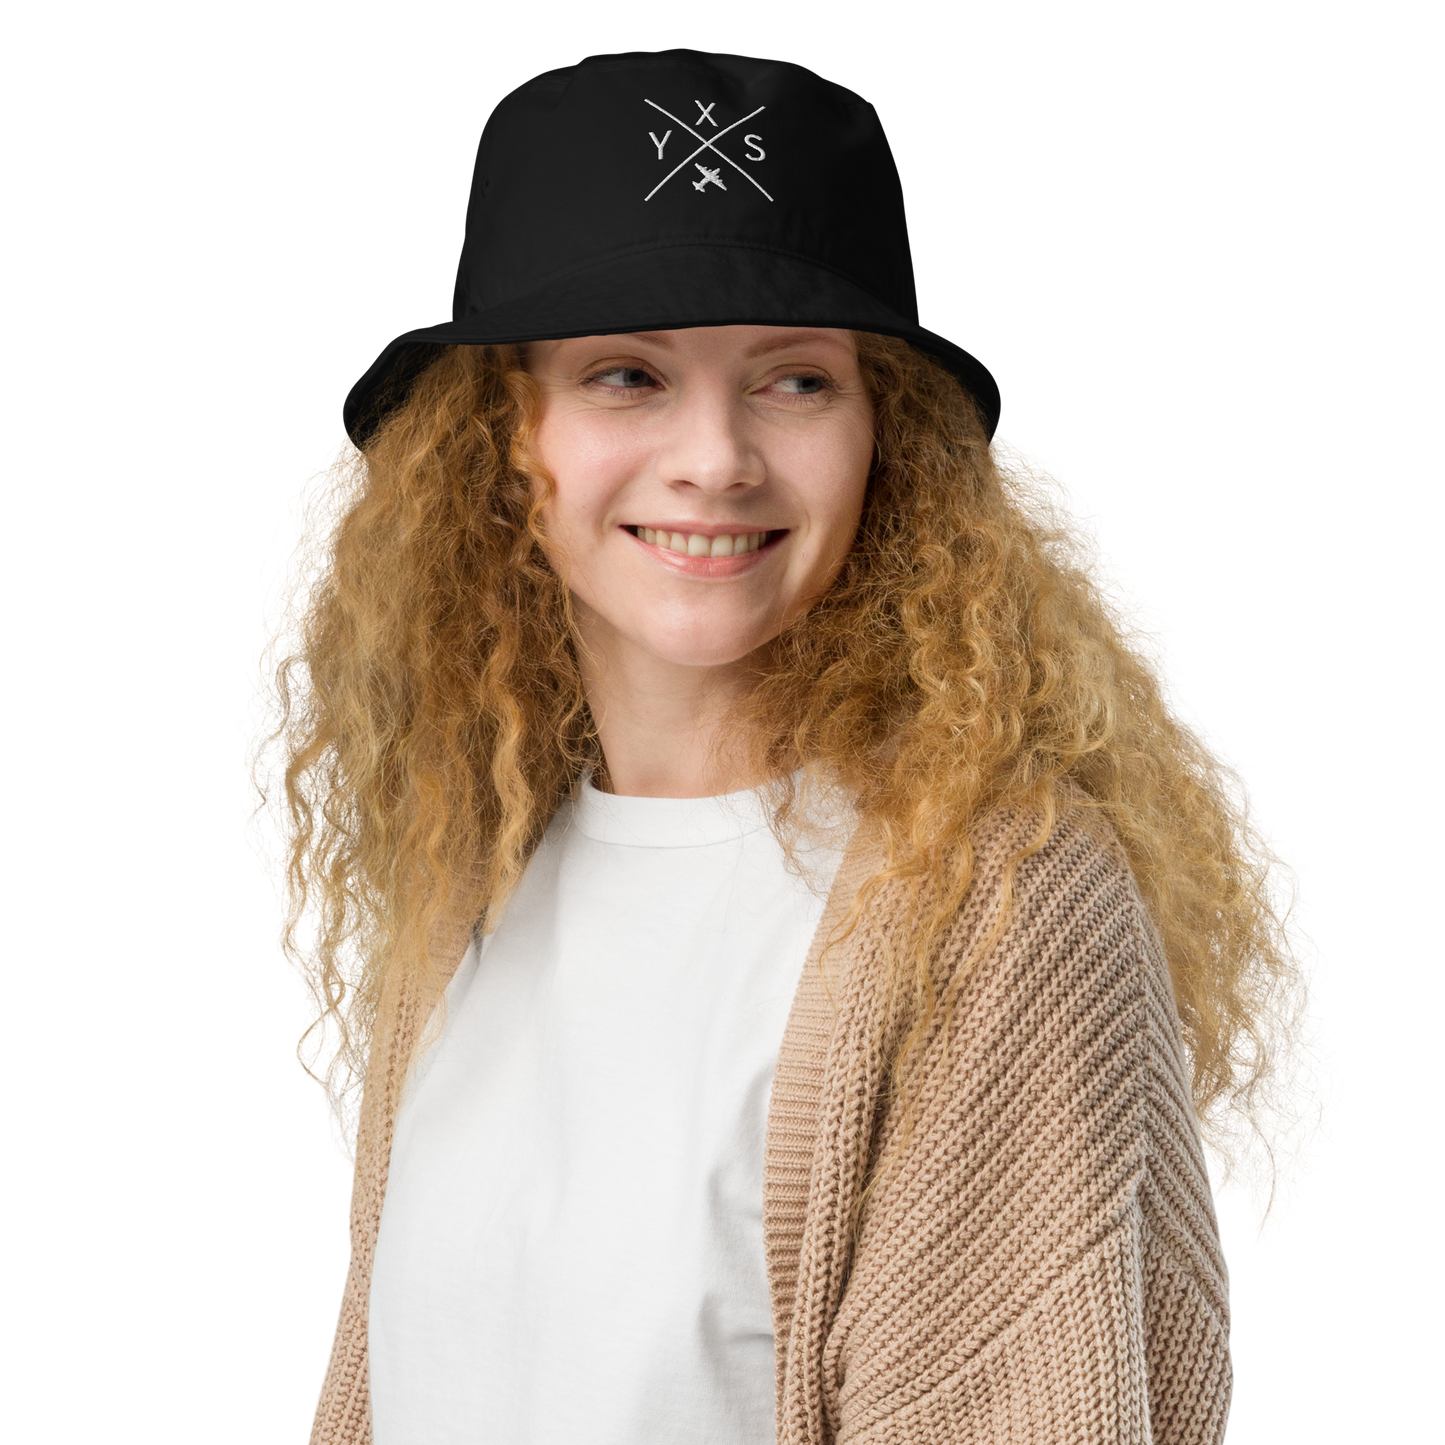 YHM Designs - YXU London Organic Cotton Bucket Hat - Crossed-X Design with Airport Code and Vintage Propliner - White Embroidery - Image 04